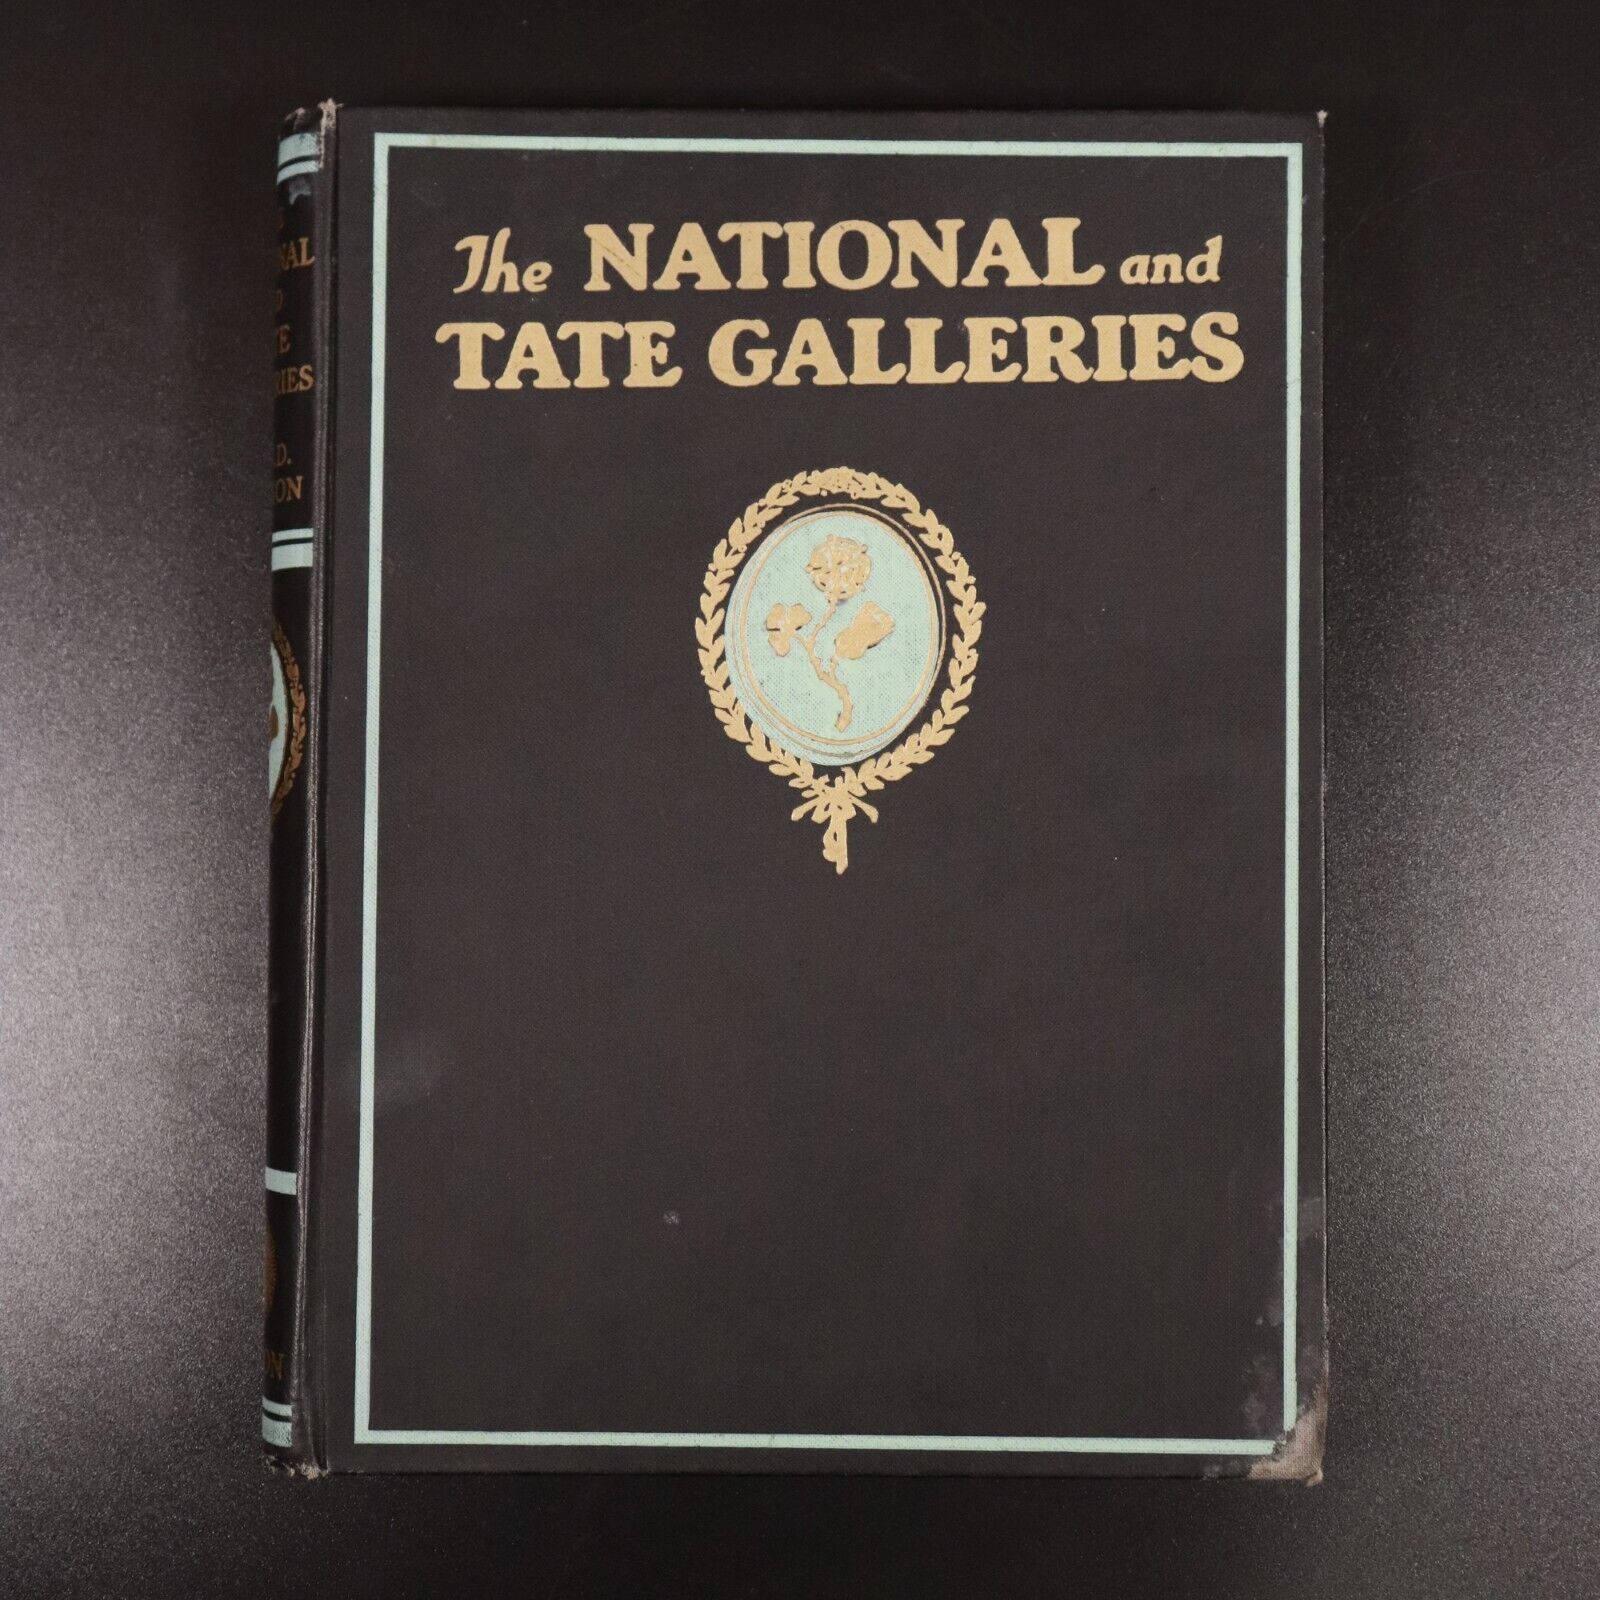 1934 The National & Tate Galleries by R.N.D. Wilson Antique British Art Book